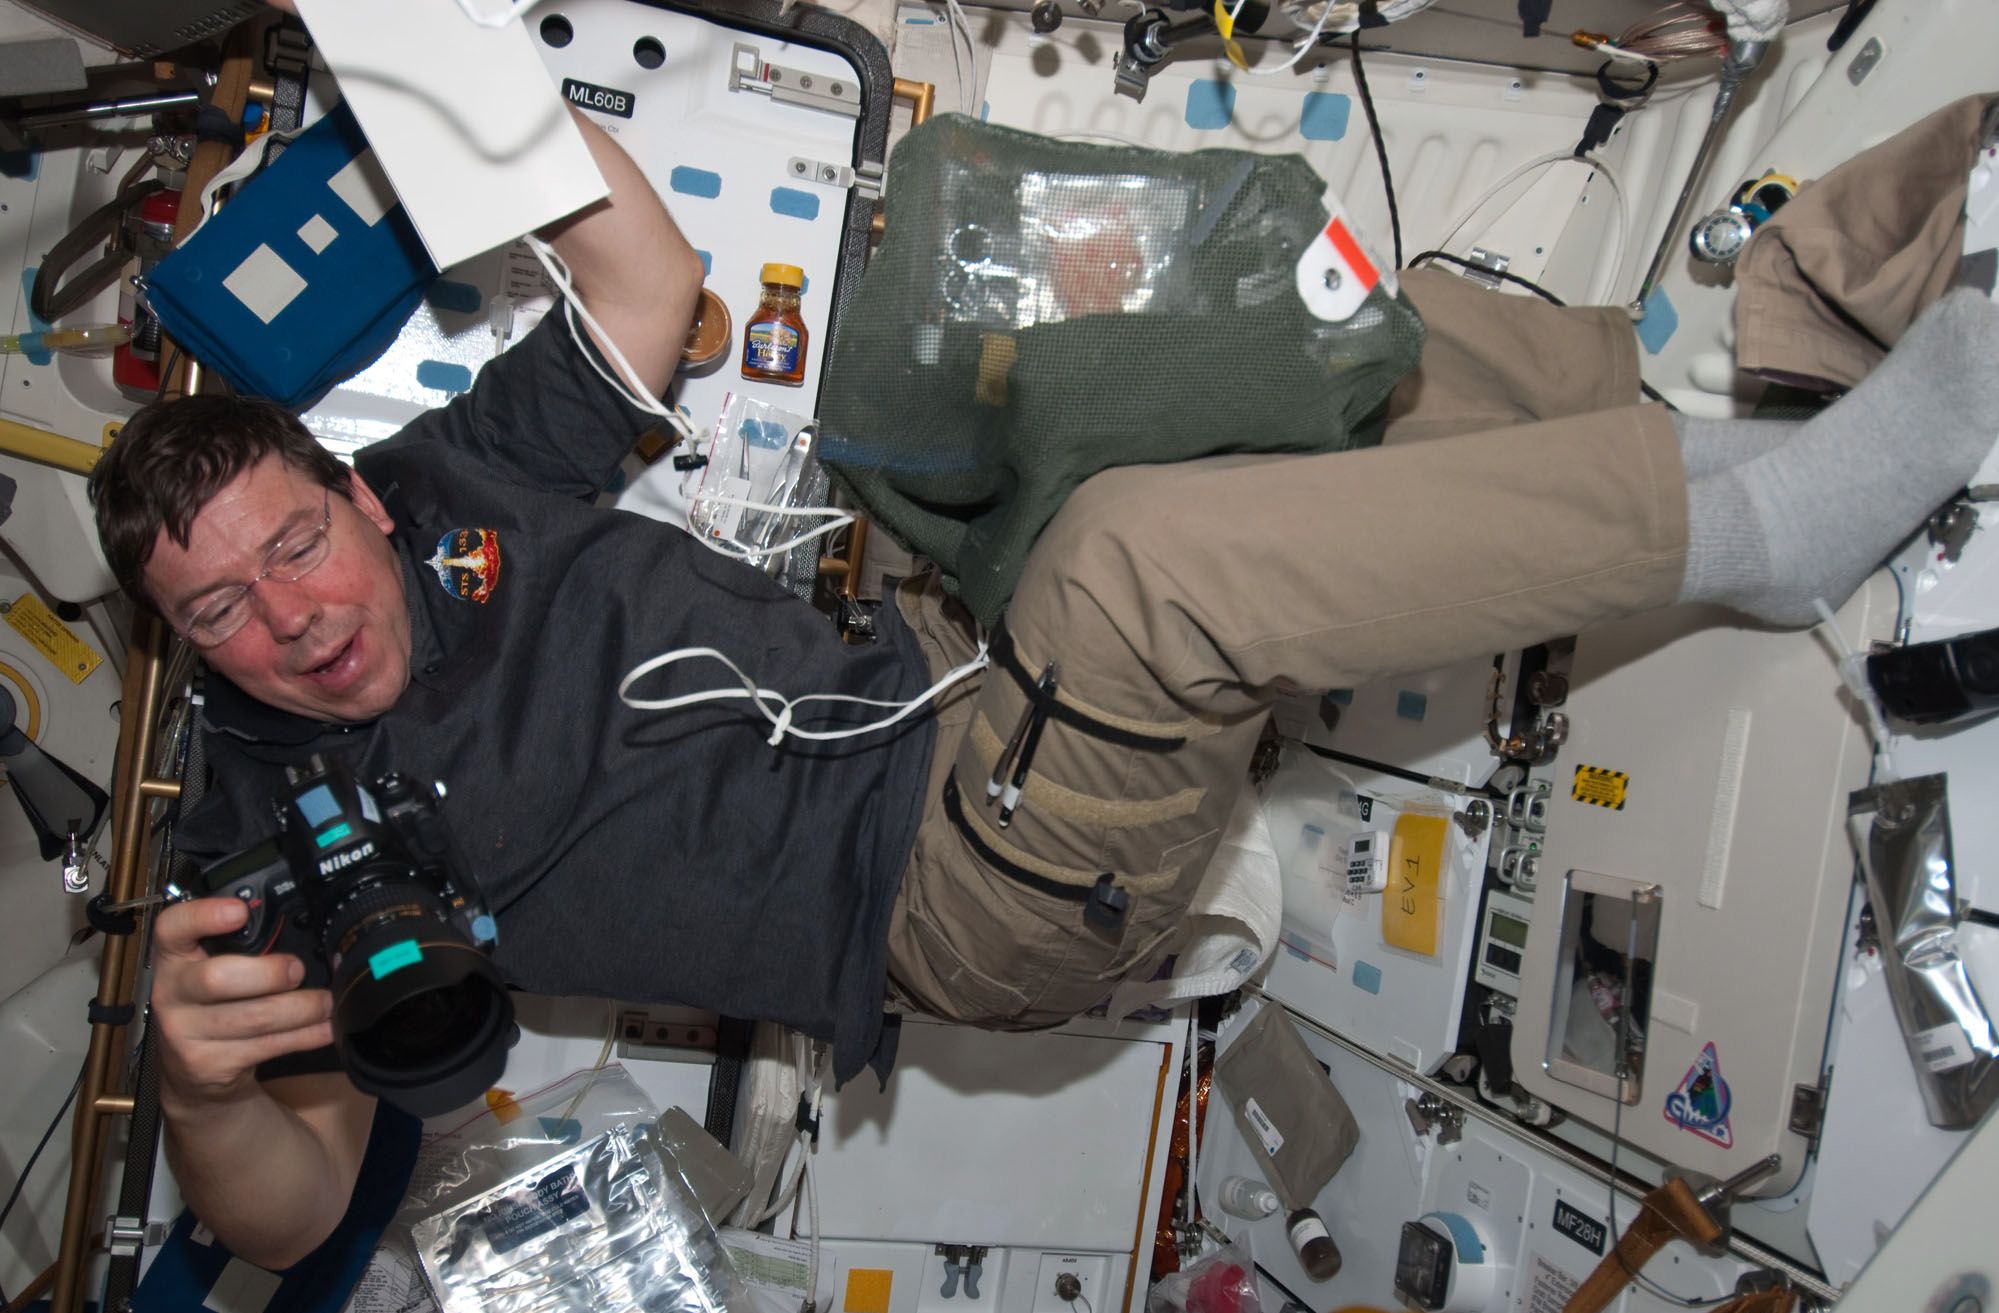 Working in weightlessness and an unexpected aspect of taking photos in zero gravity were factors on two particularly memorable days at the International Space Station for astronaut Mike Barratt.